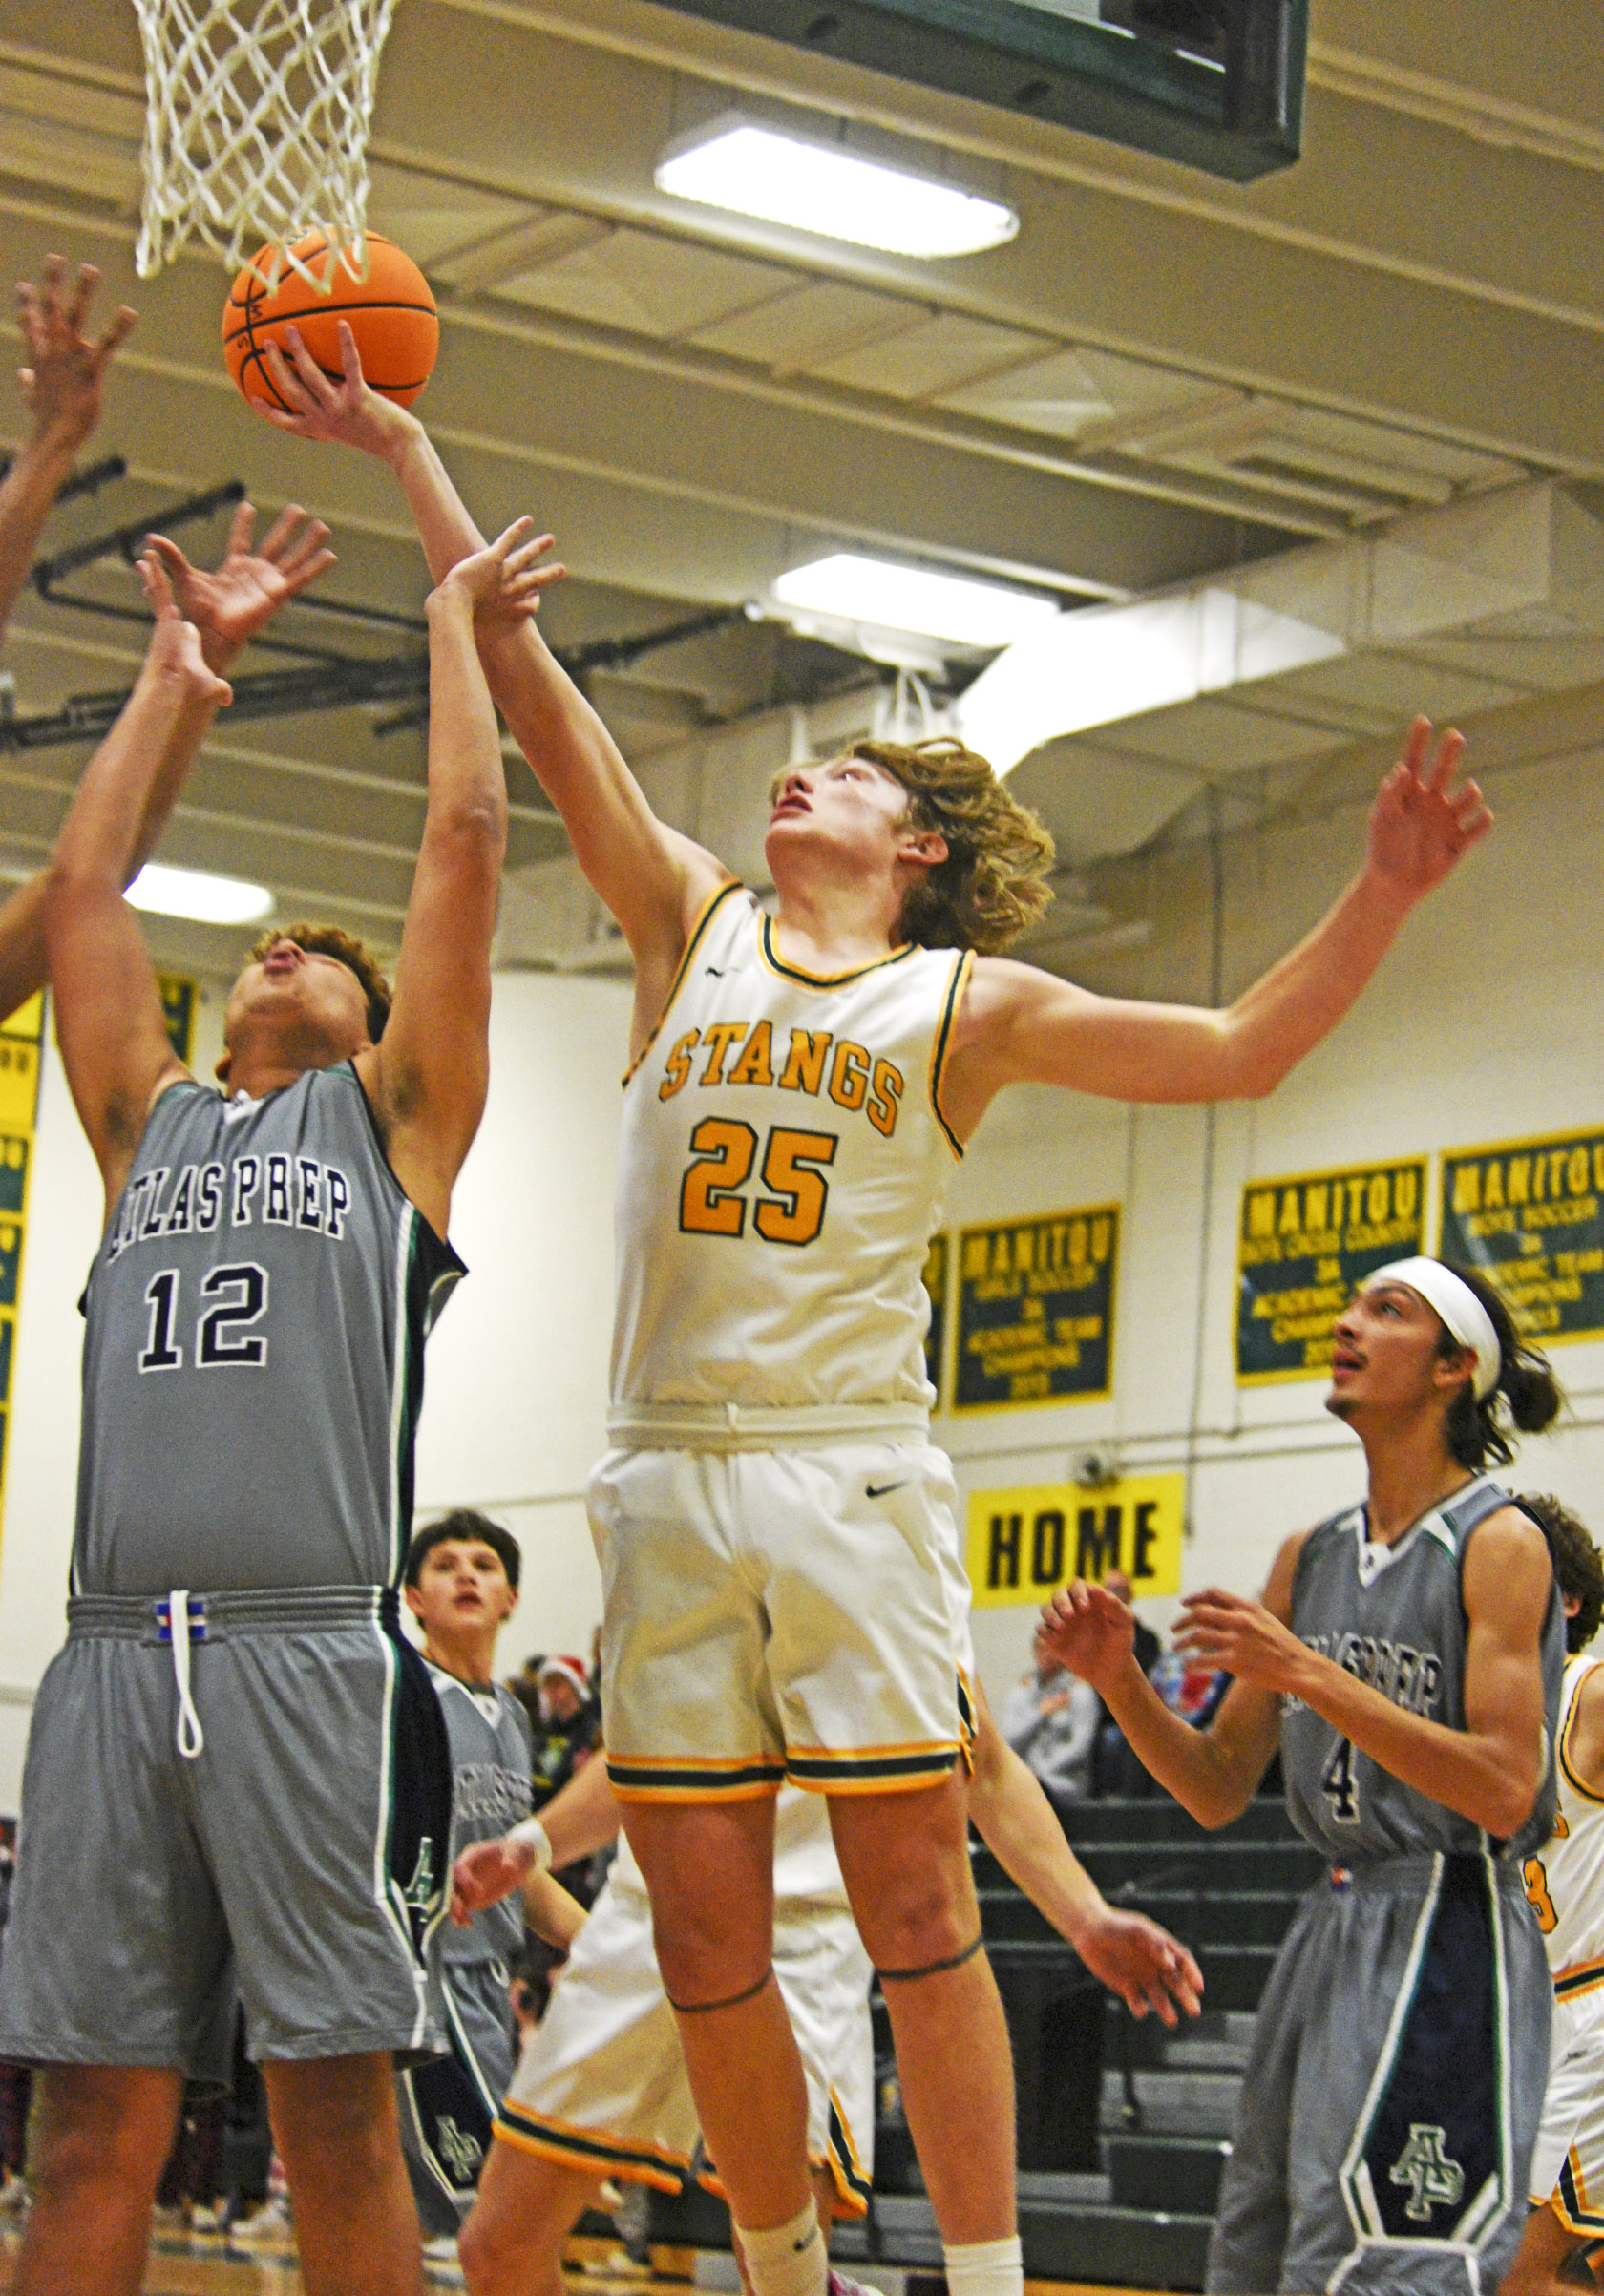 Photo by Bryan Oller. Nate Gentzel outreaches an Atlas Prep player during their Dec. 16 game.